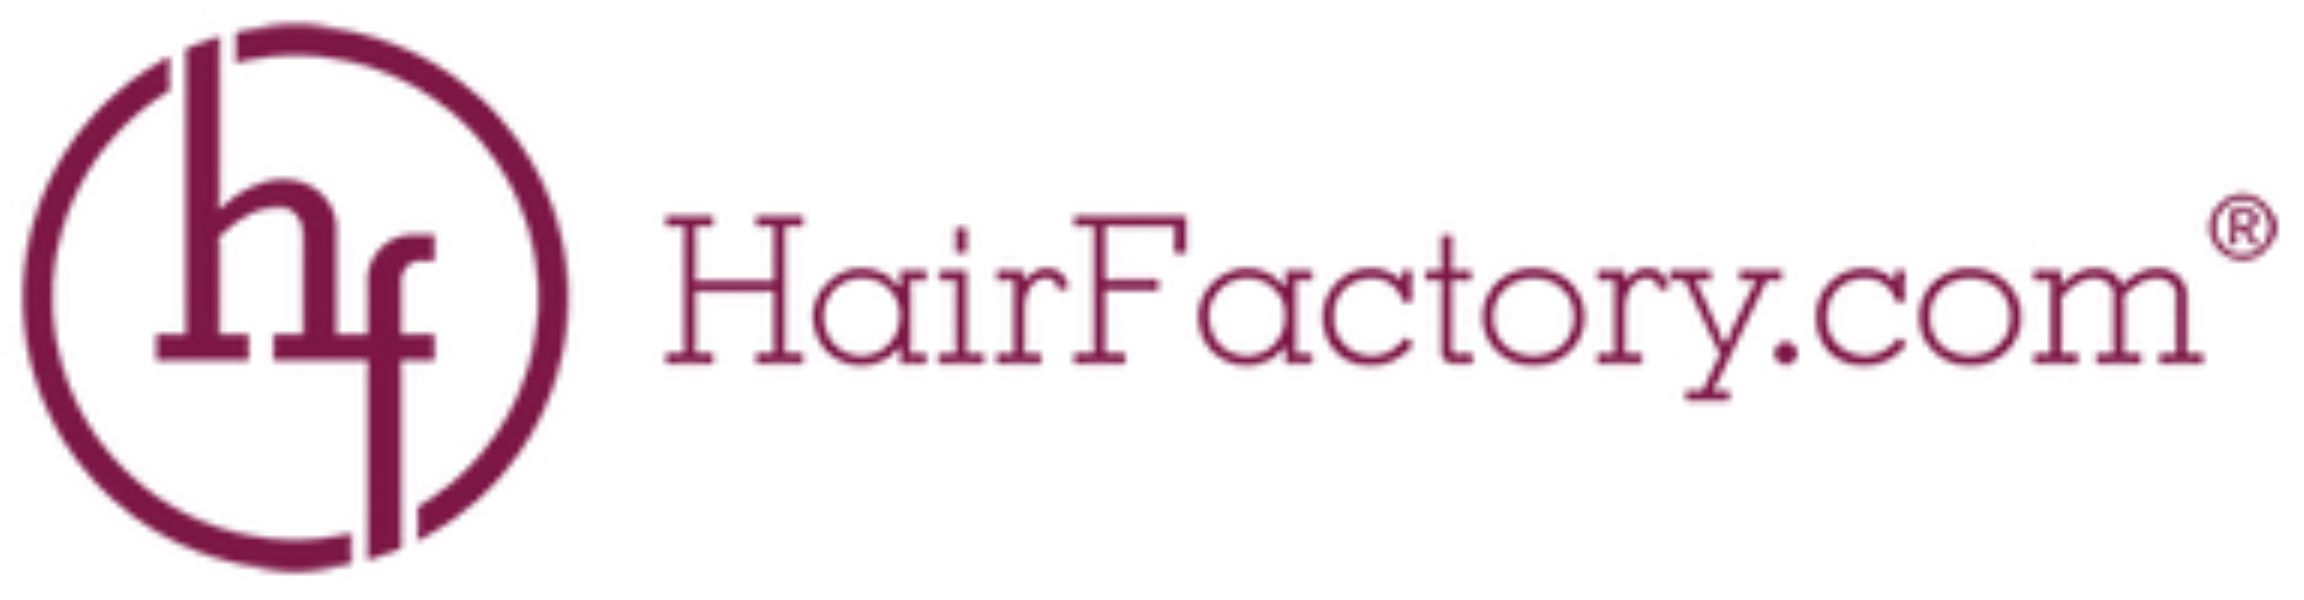 Business logo of Hair Factory